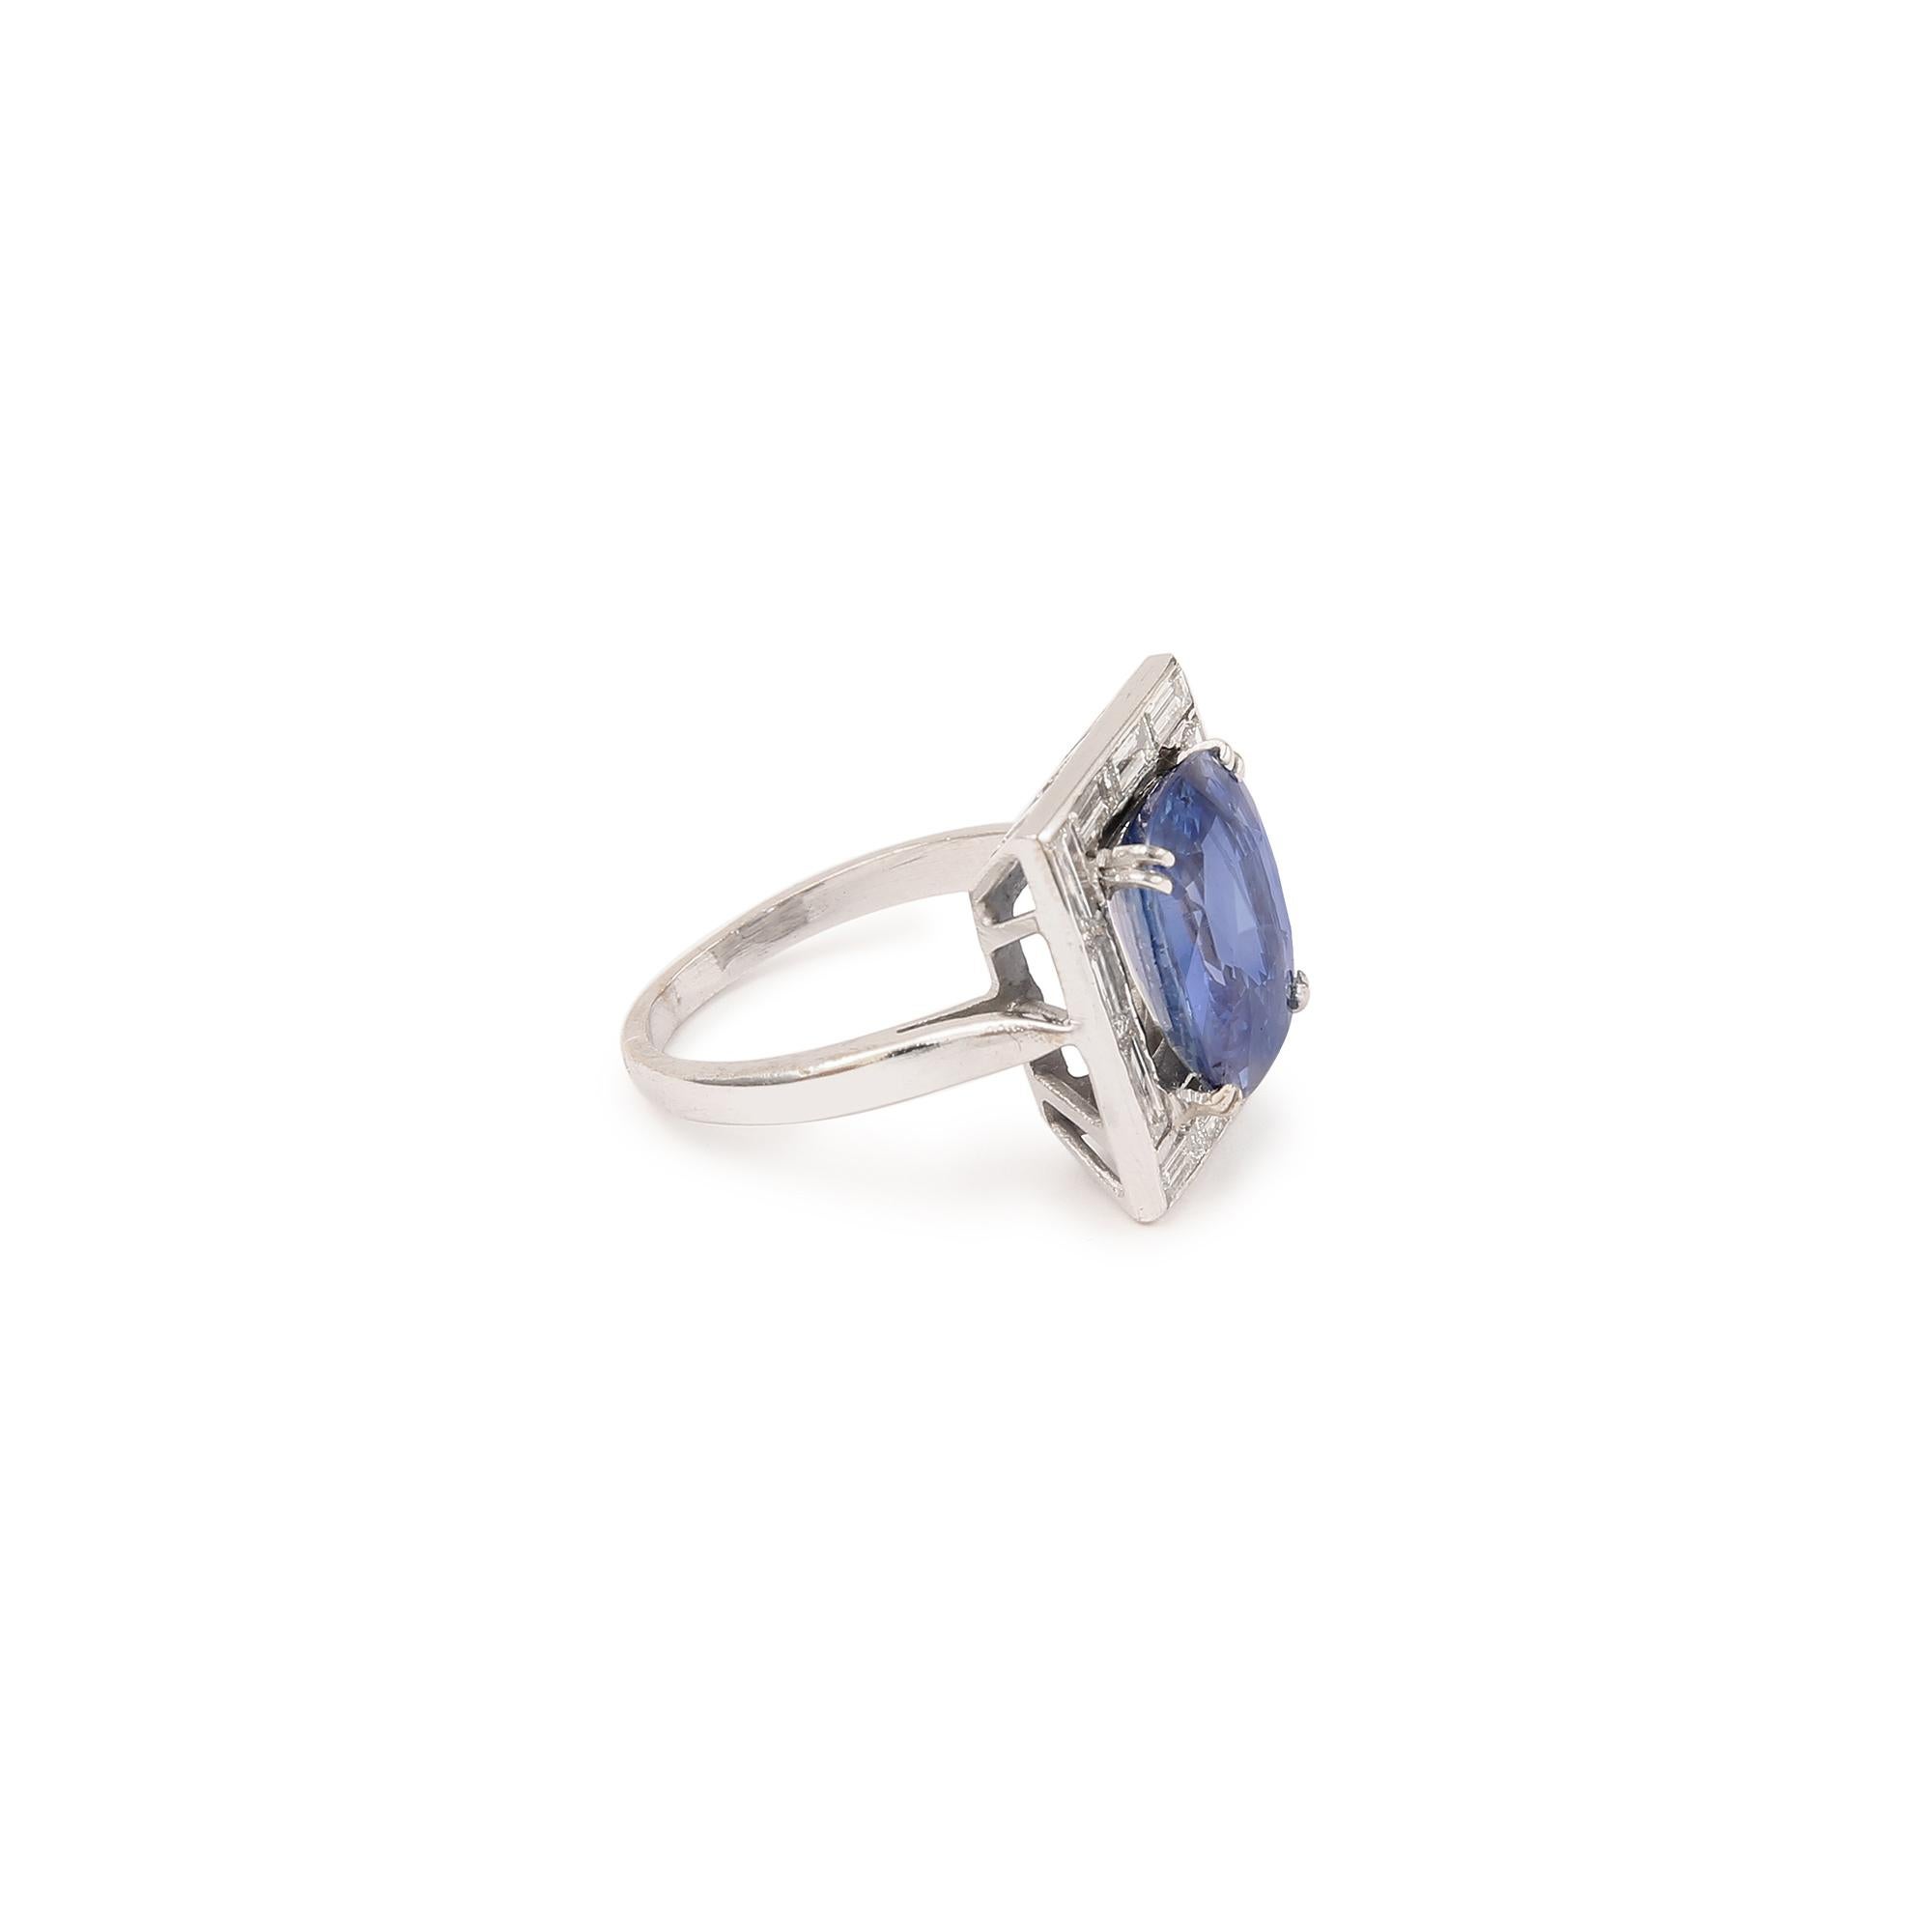 Beautiful vintage ring in white gold set with a large cushion cut sapphire and baguette cut diamonds.

Sapphire weight : 7.04 Carats

Sapphire dimensions:

Total weight of diamonds estimated 0.60 carats

Ring size : 16.18 x 15.58 x 7.07 mm (0.637 x